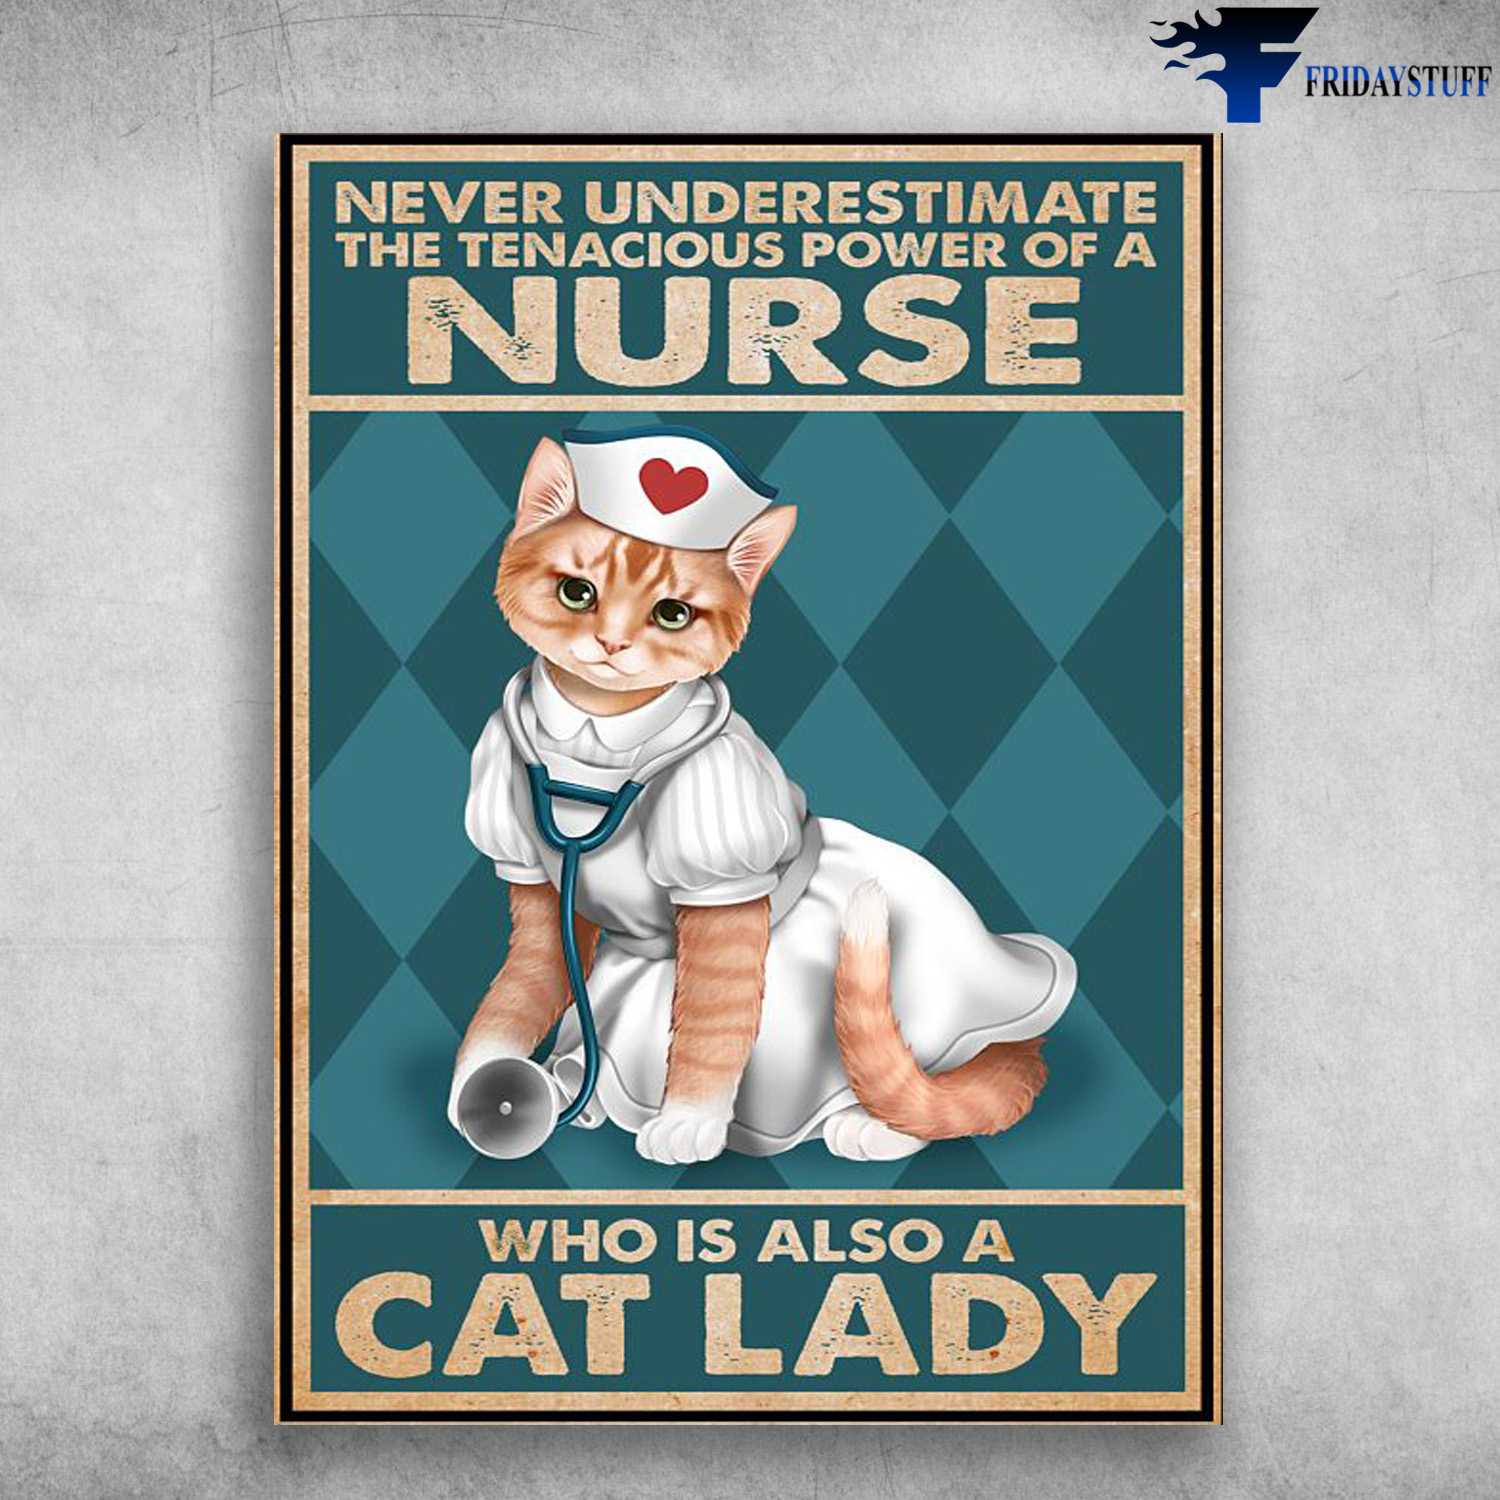 Nurse Poster, Cat Lover, Never Underestimate The Tenacious Power Of A Nurse, Who Is Also Cat Lady